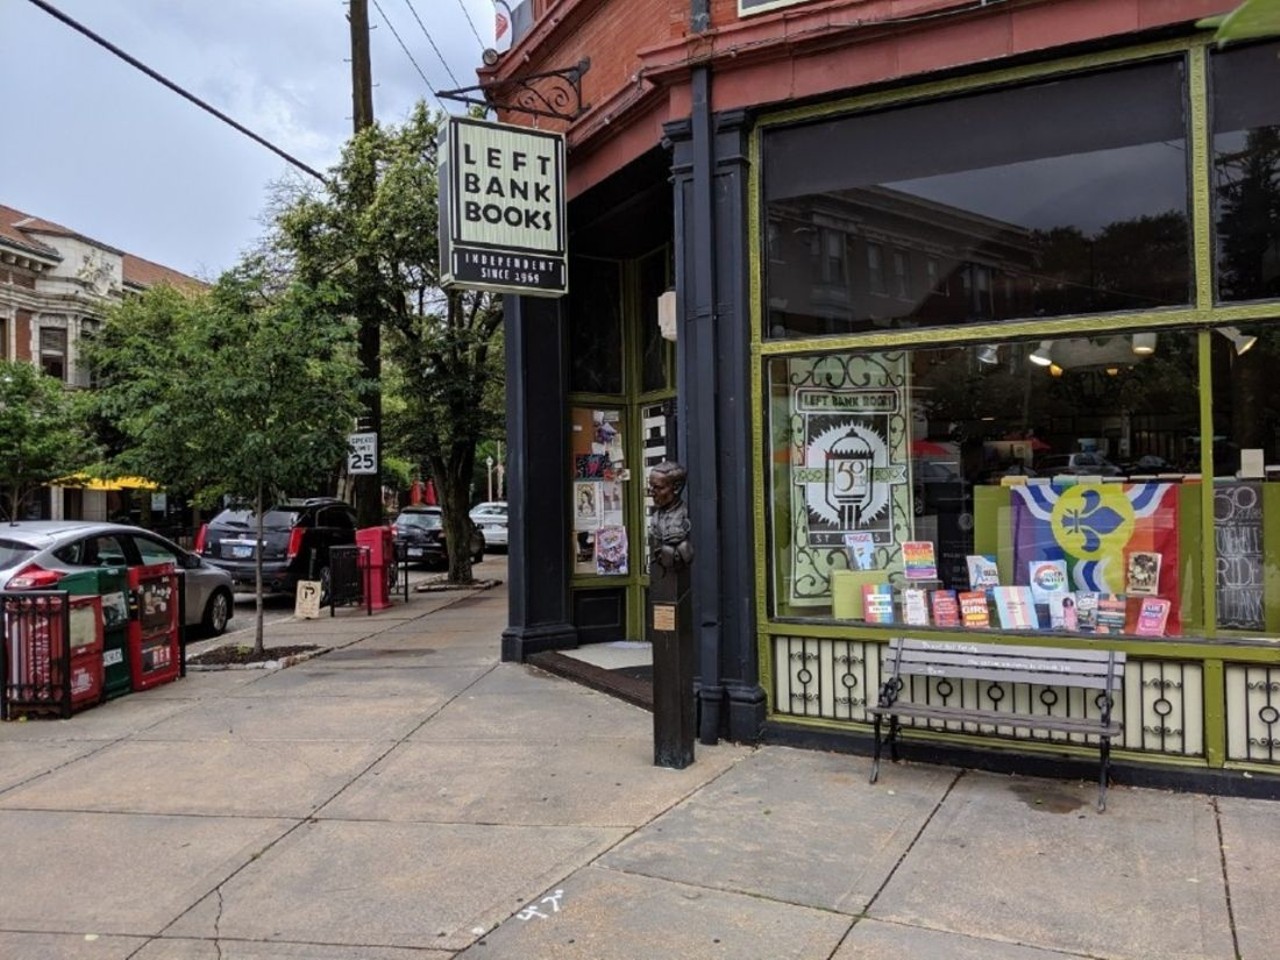 Left Bank Books
(399 N Euclid Avenue, 314-367-6731,  left-bank.com)
Books aren&#146;t the only thing for sale at Left Bank Books. Cross-stitch kits, enamel pins, candles and games only scratch the surface of the possibilities of gifts and goods to buy at Left Bank.
Find out more here.
Photo credit: Joshua Phelps